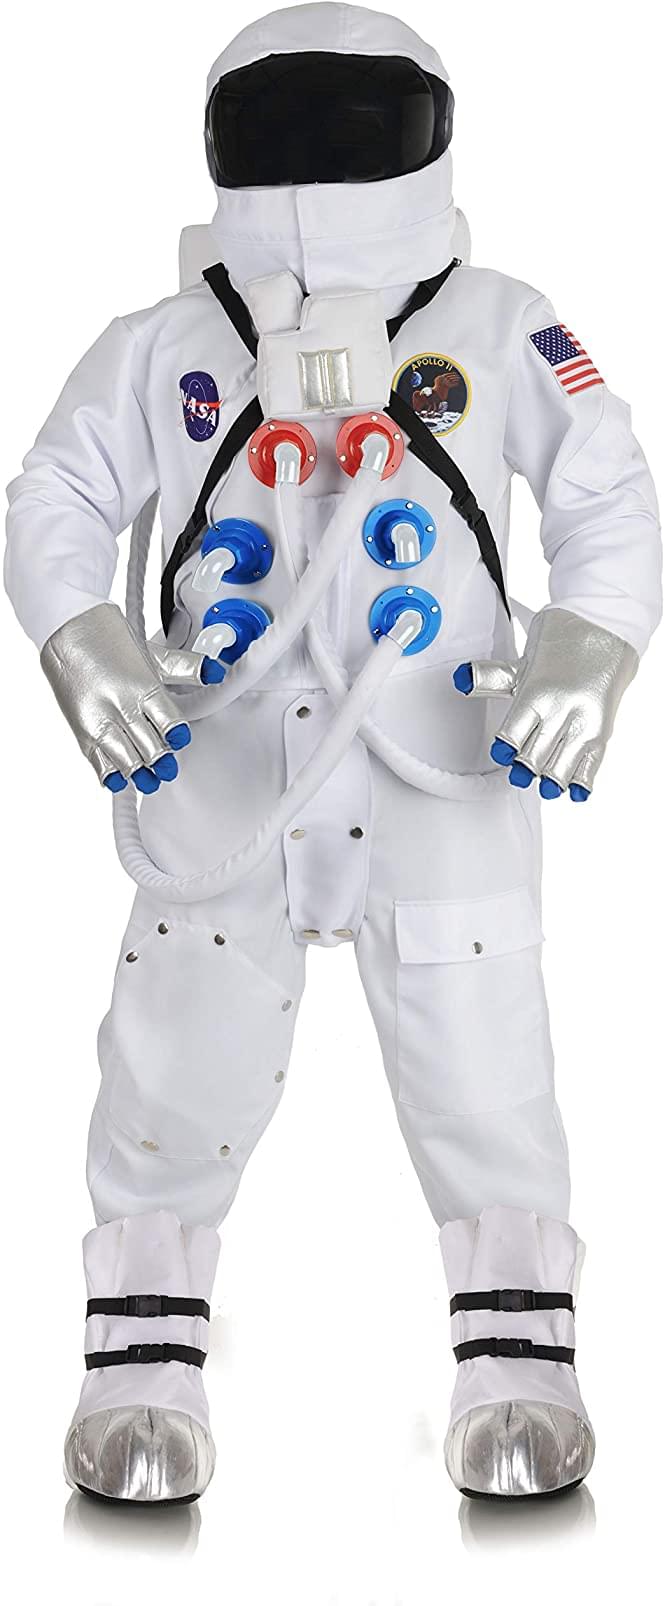 Deluxe Astronaut Suit Adult Costume | White | One Size